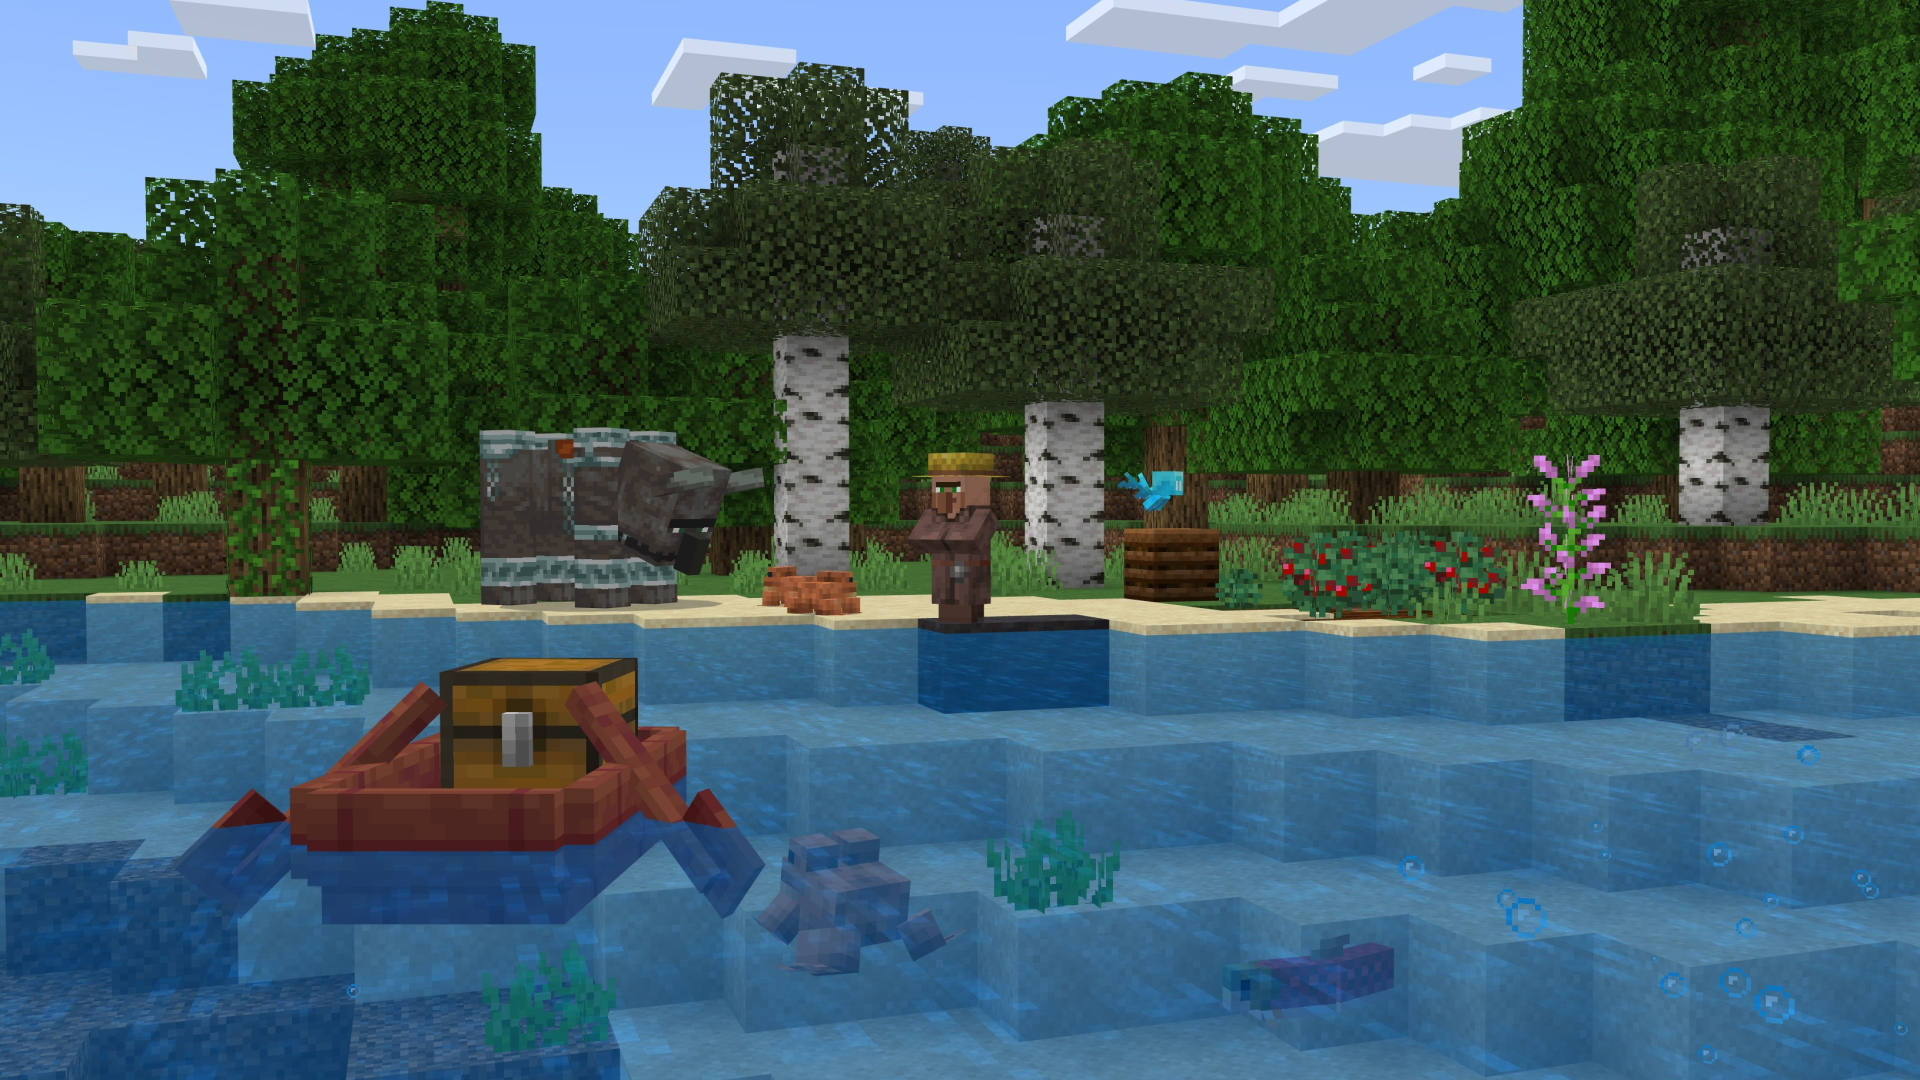 Minecraft Pocket Edition' Update Brings 'Prettier, Faster, Less